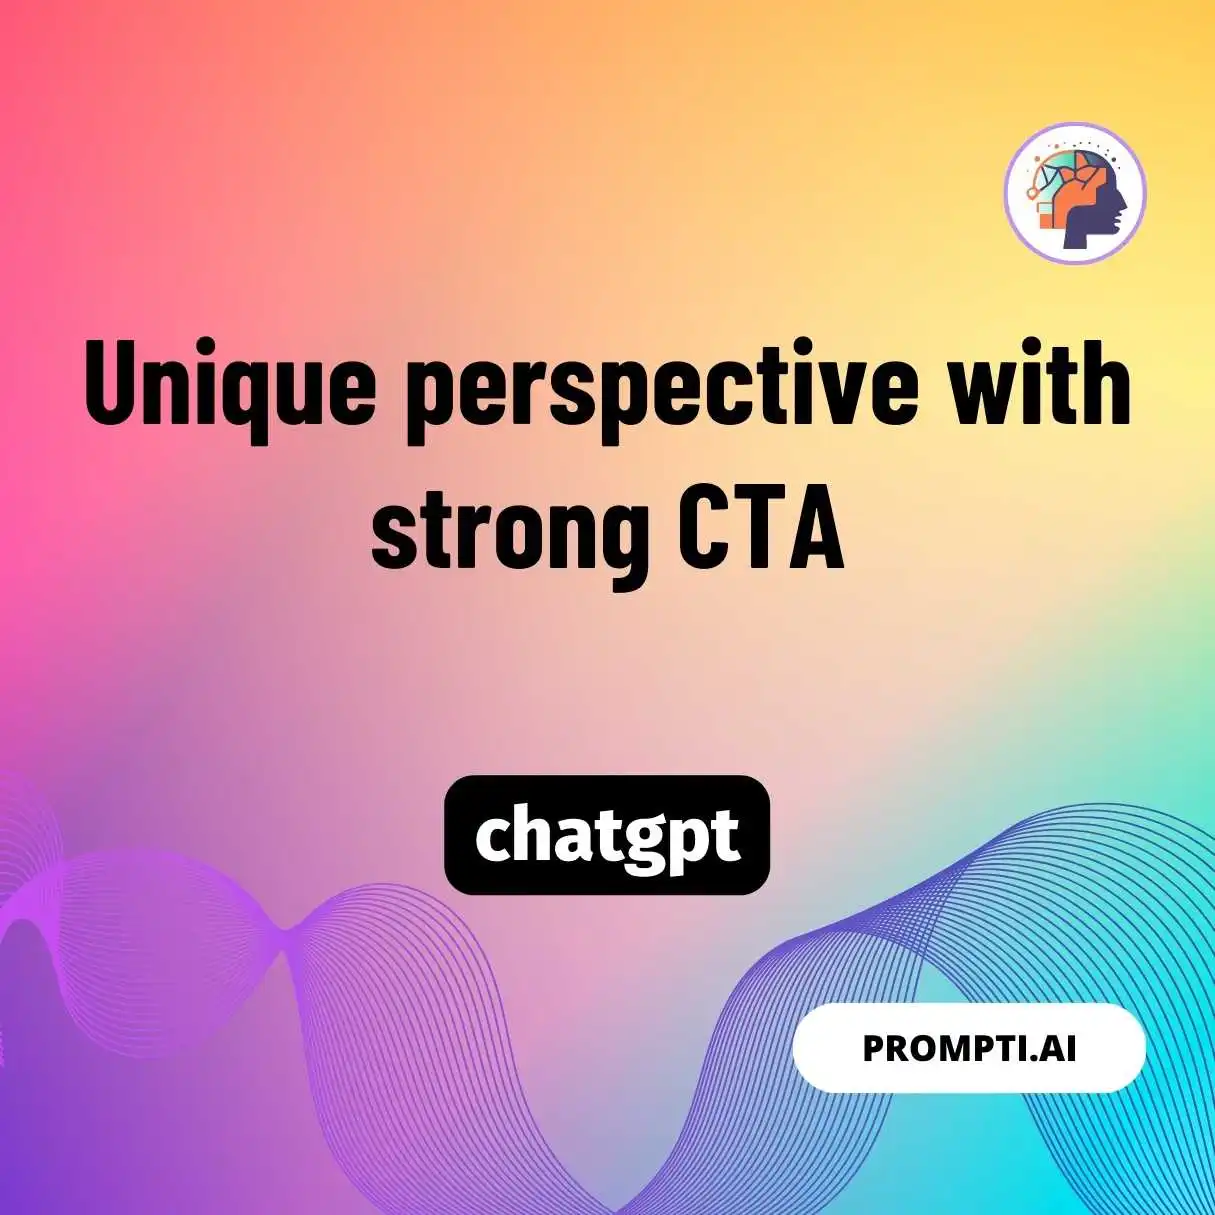 Unique perspective with strong CTA